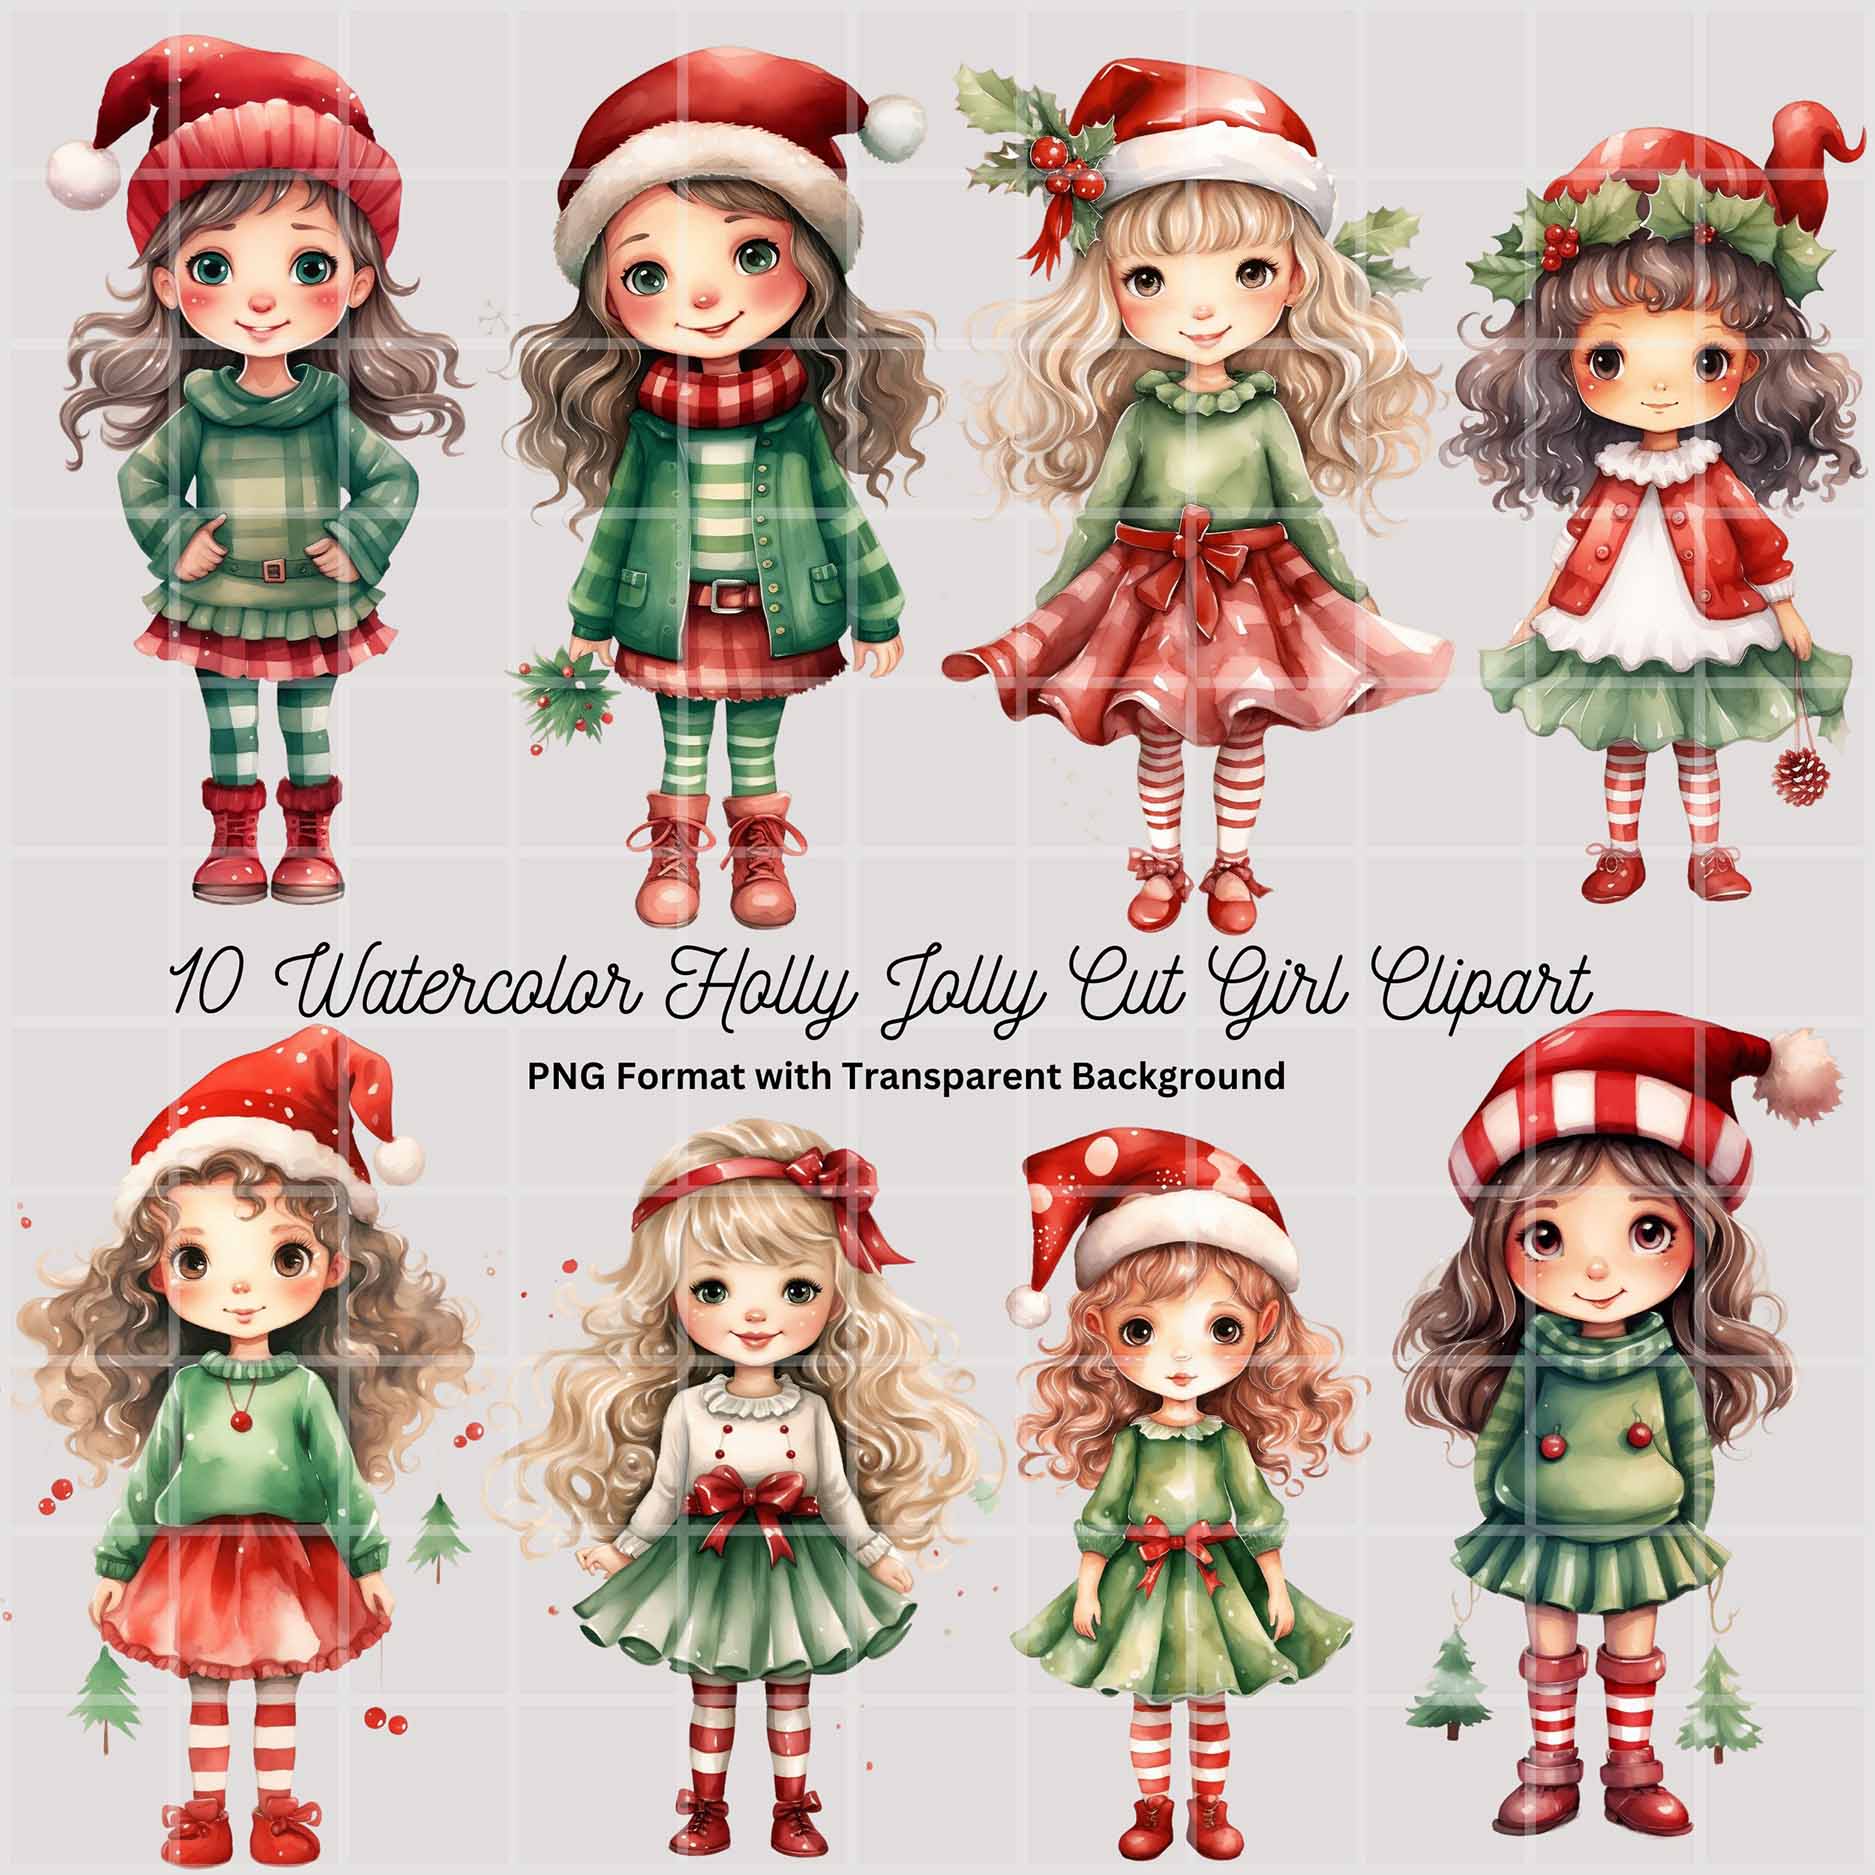 Watercolor Christmas Mail Clipart  Christmas watercolor, Christmas mail,  Christmas present clip art